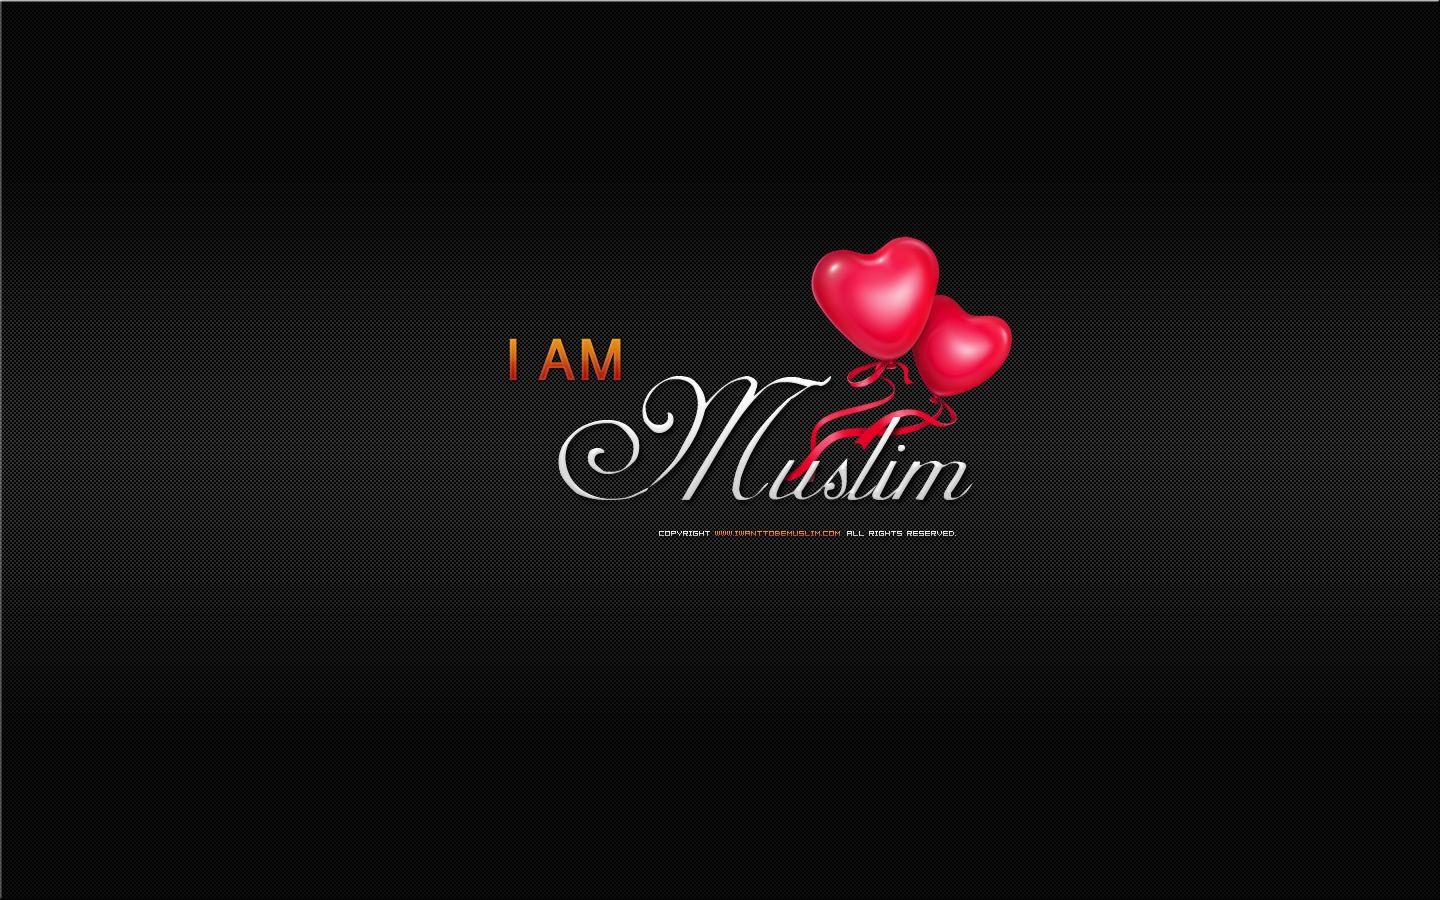 HD Islamic Wallpaper By I WANT TO BE MUSLIM